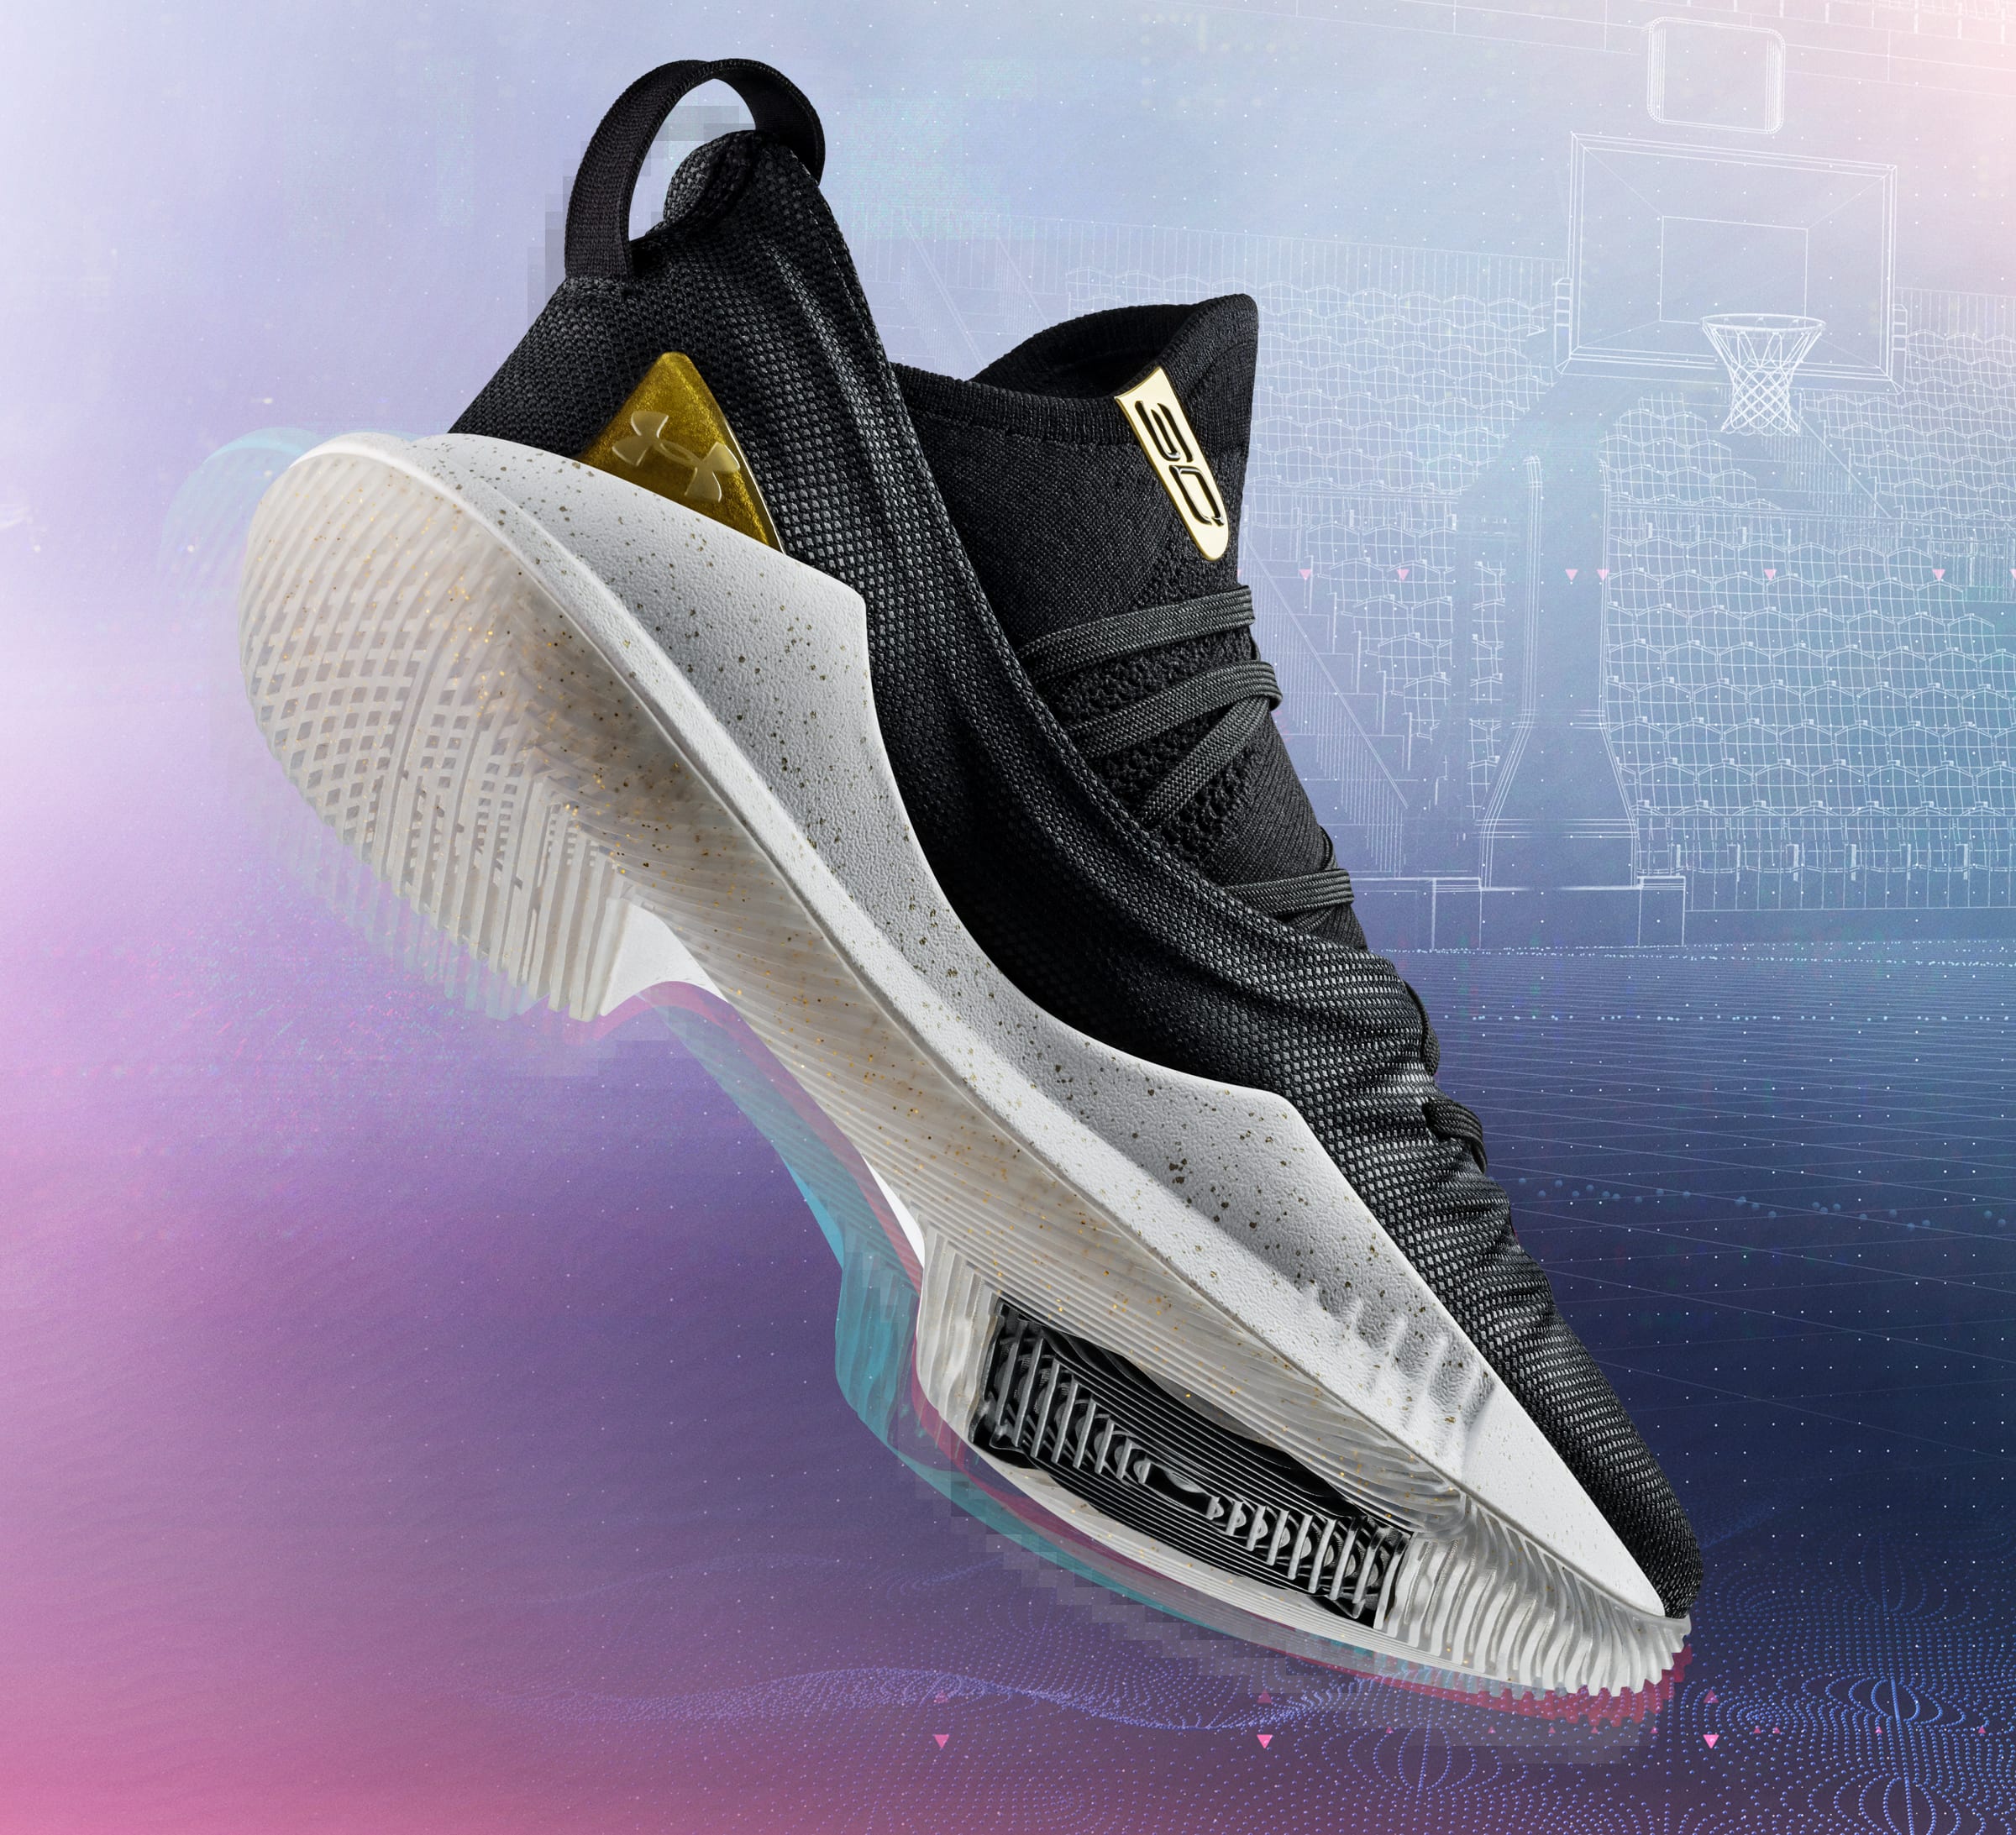 Under Armour Curry 5 &#x27;Takeover Edition&#x27; Black (Sole)